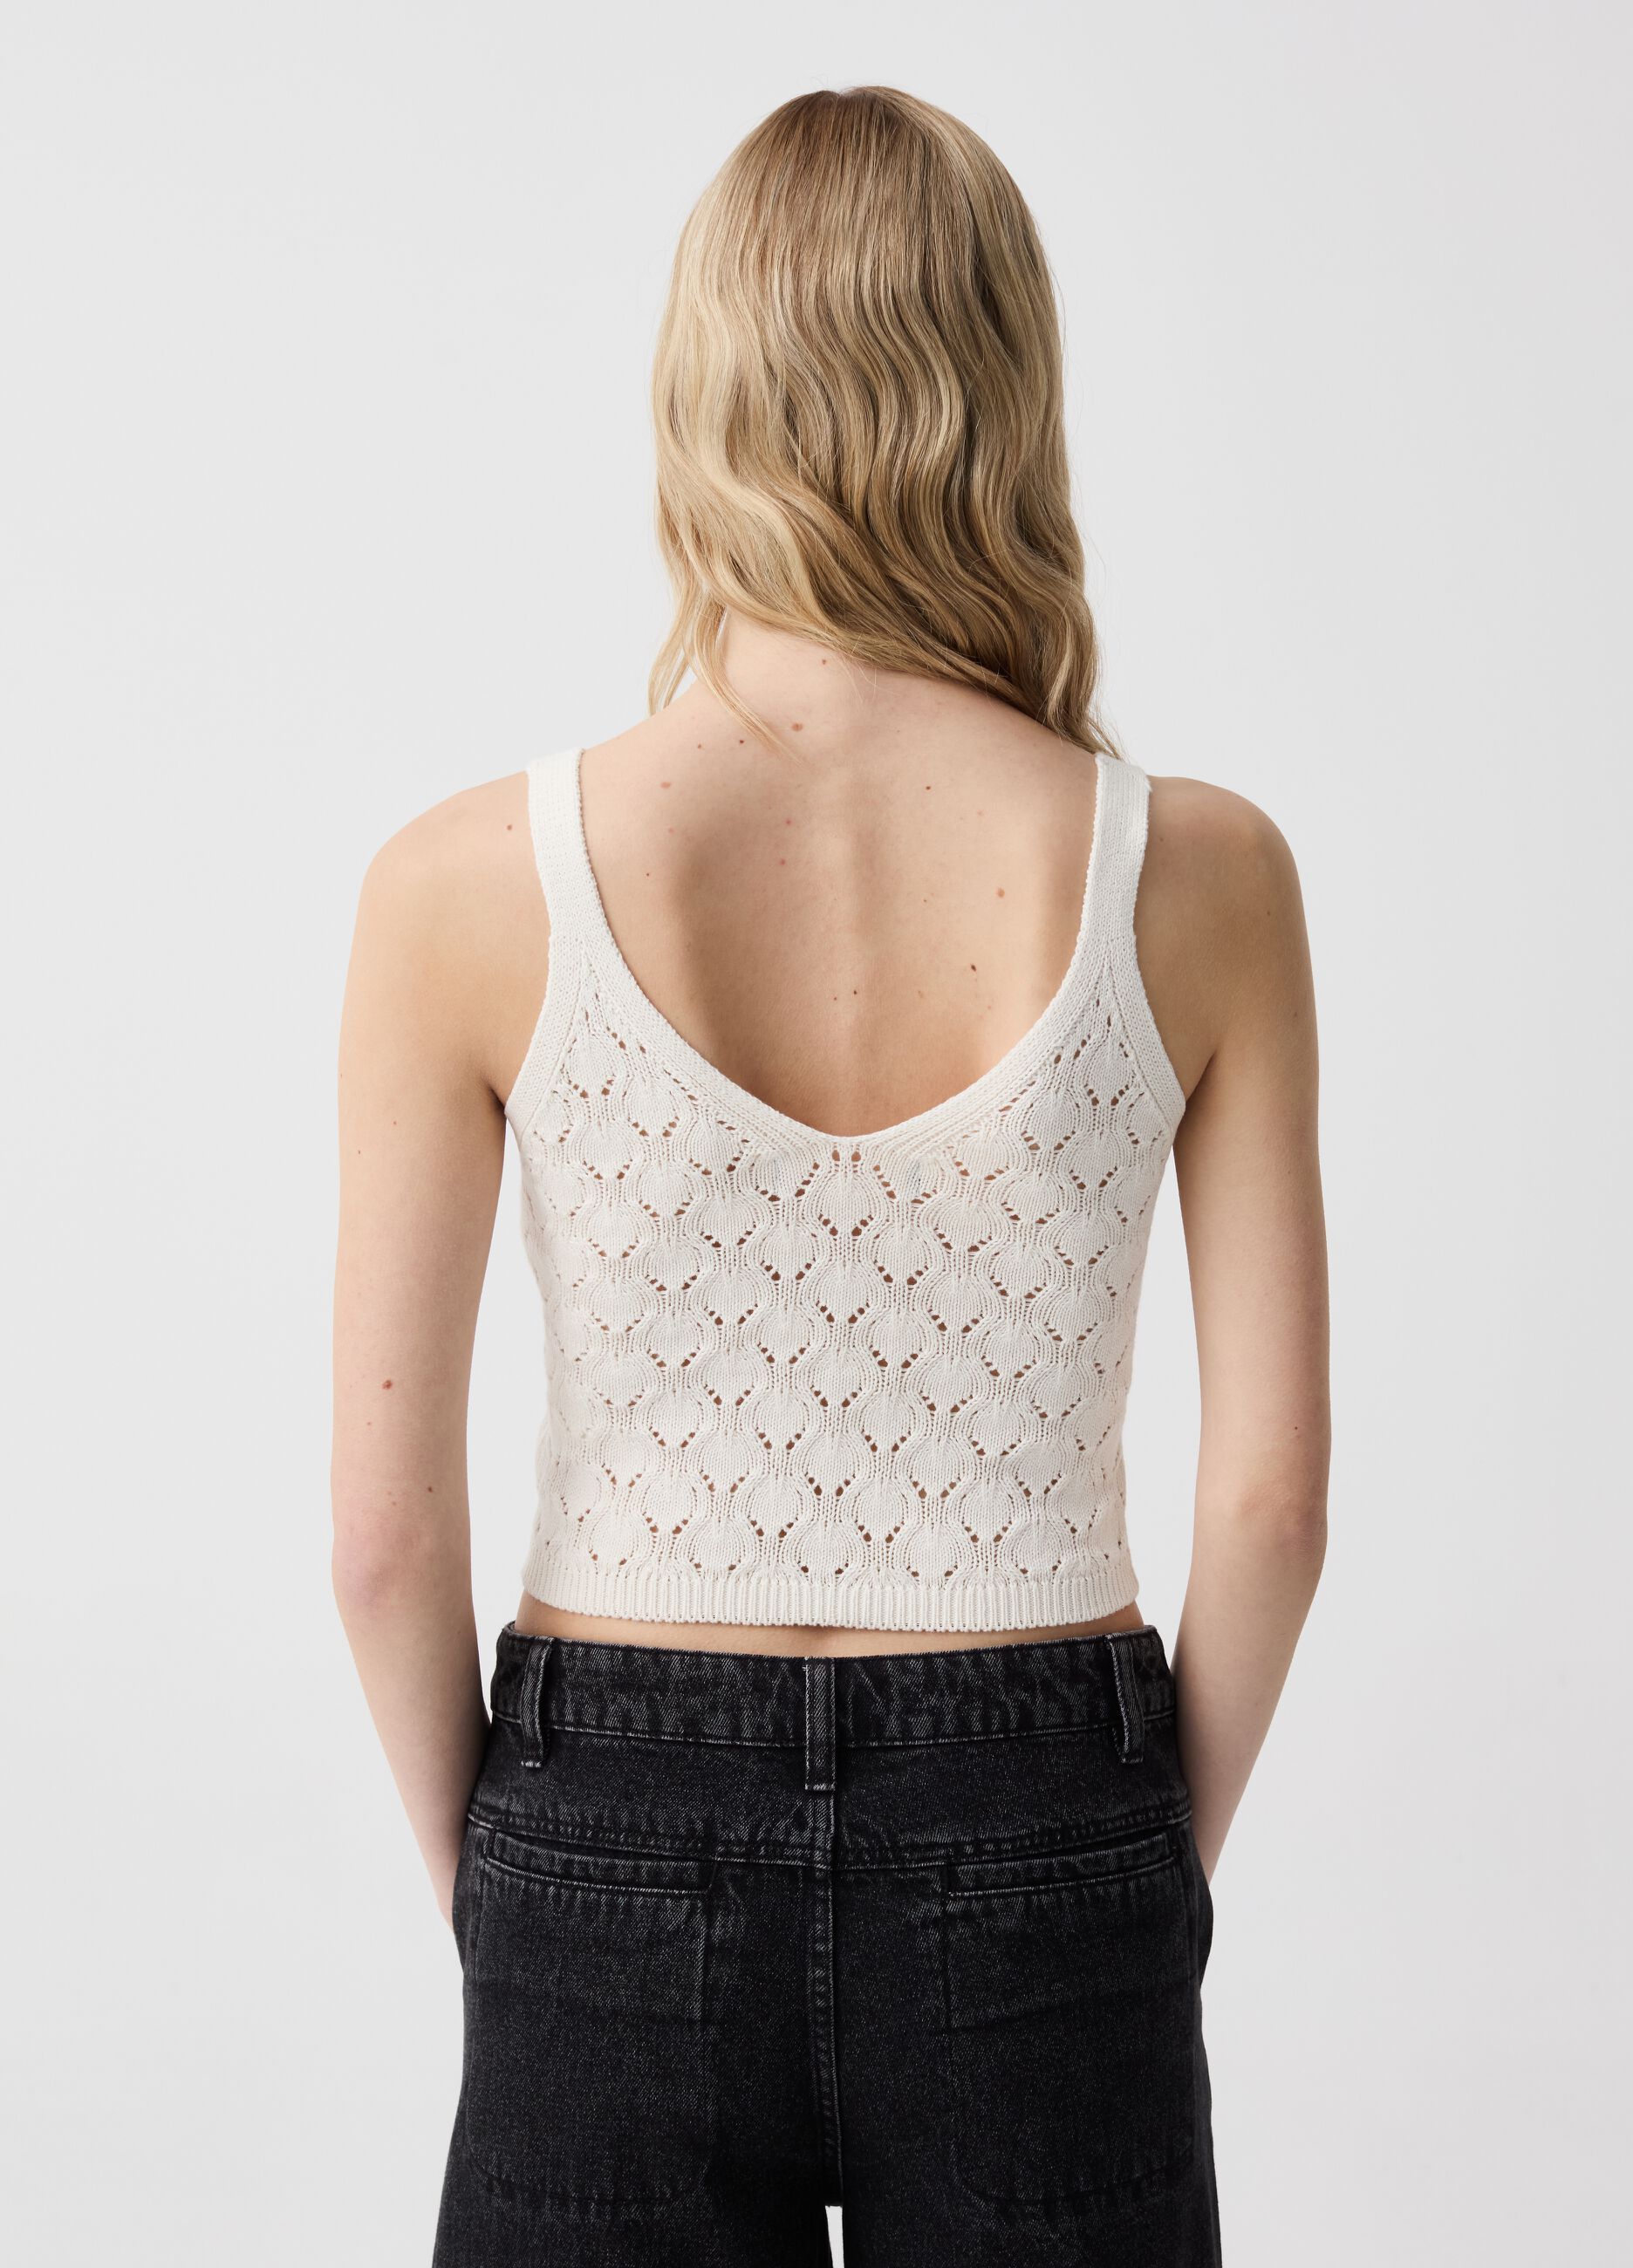 Tank top in crocheted cotton